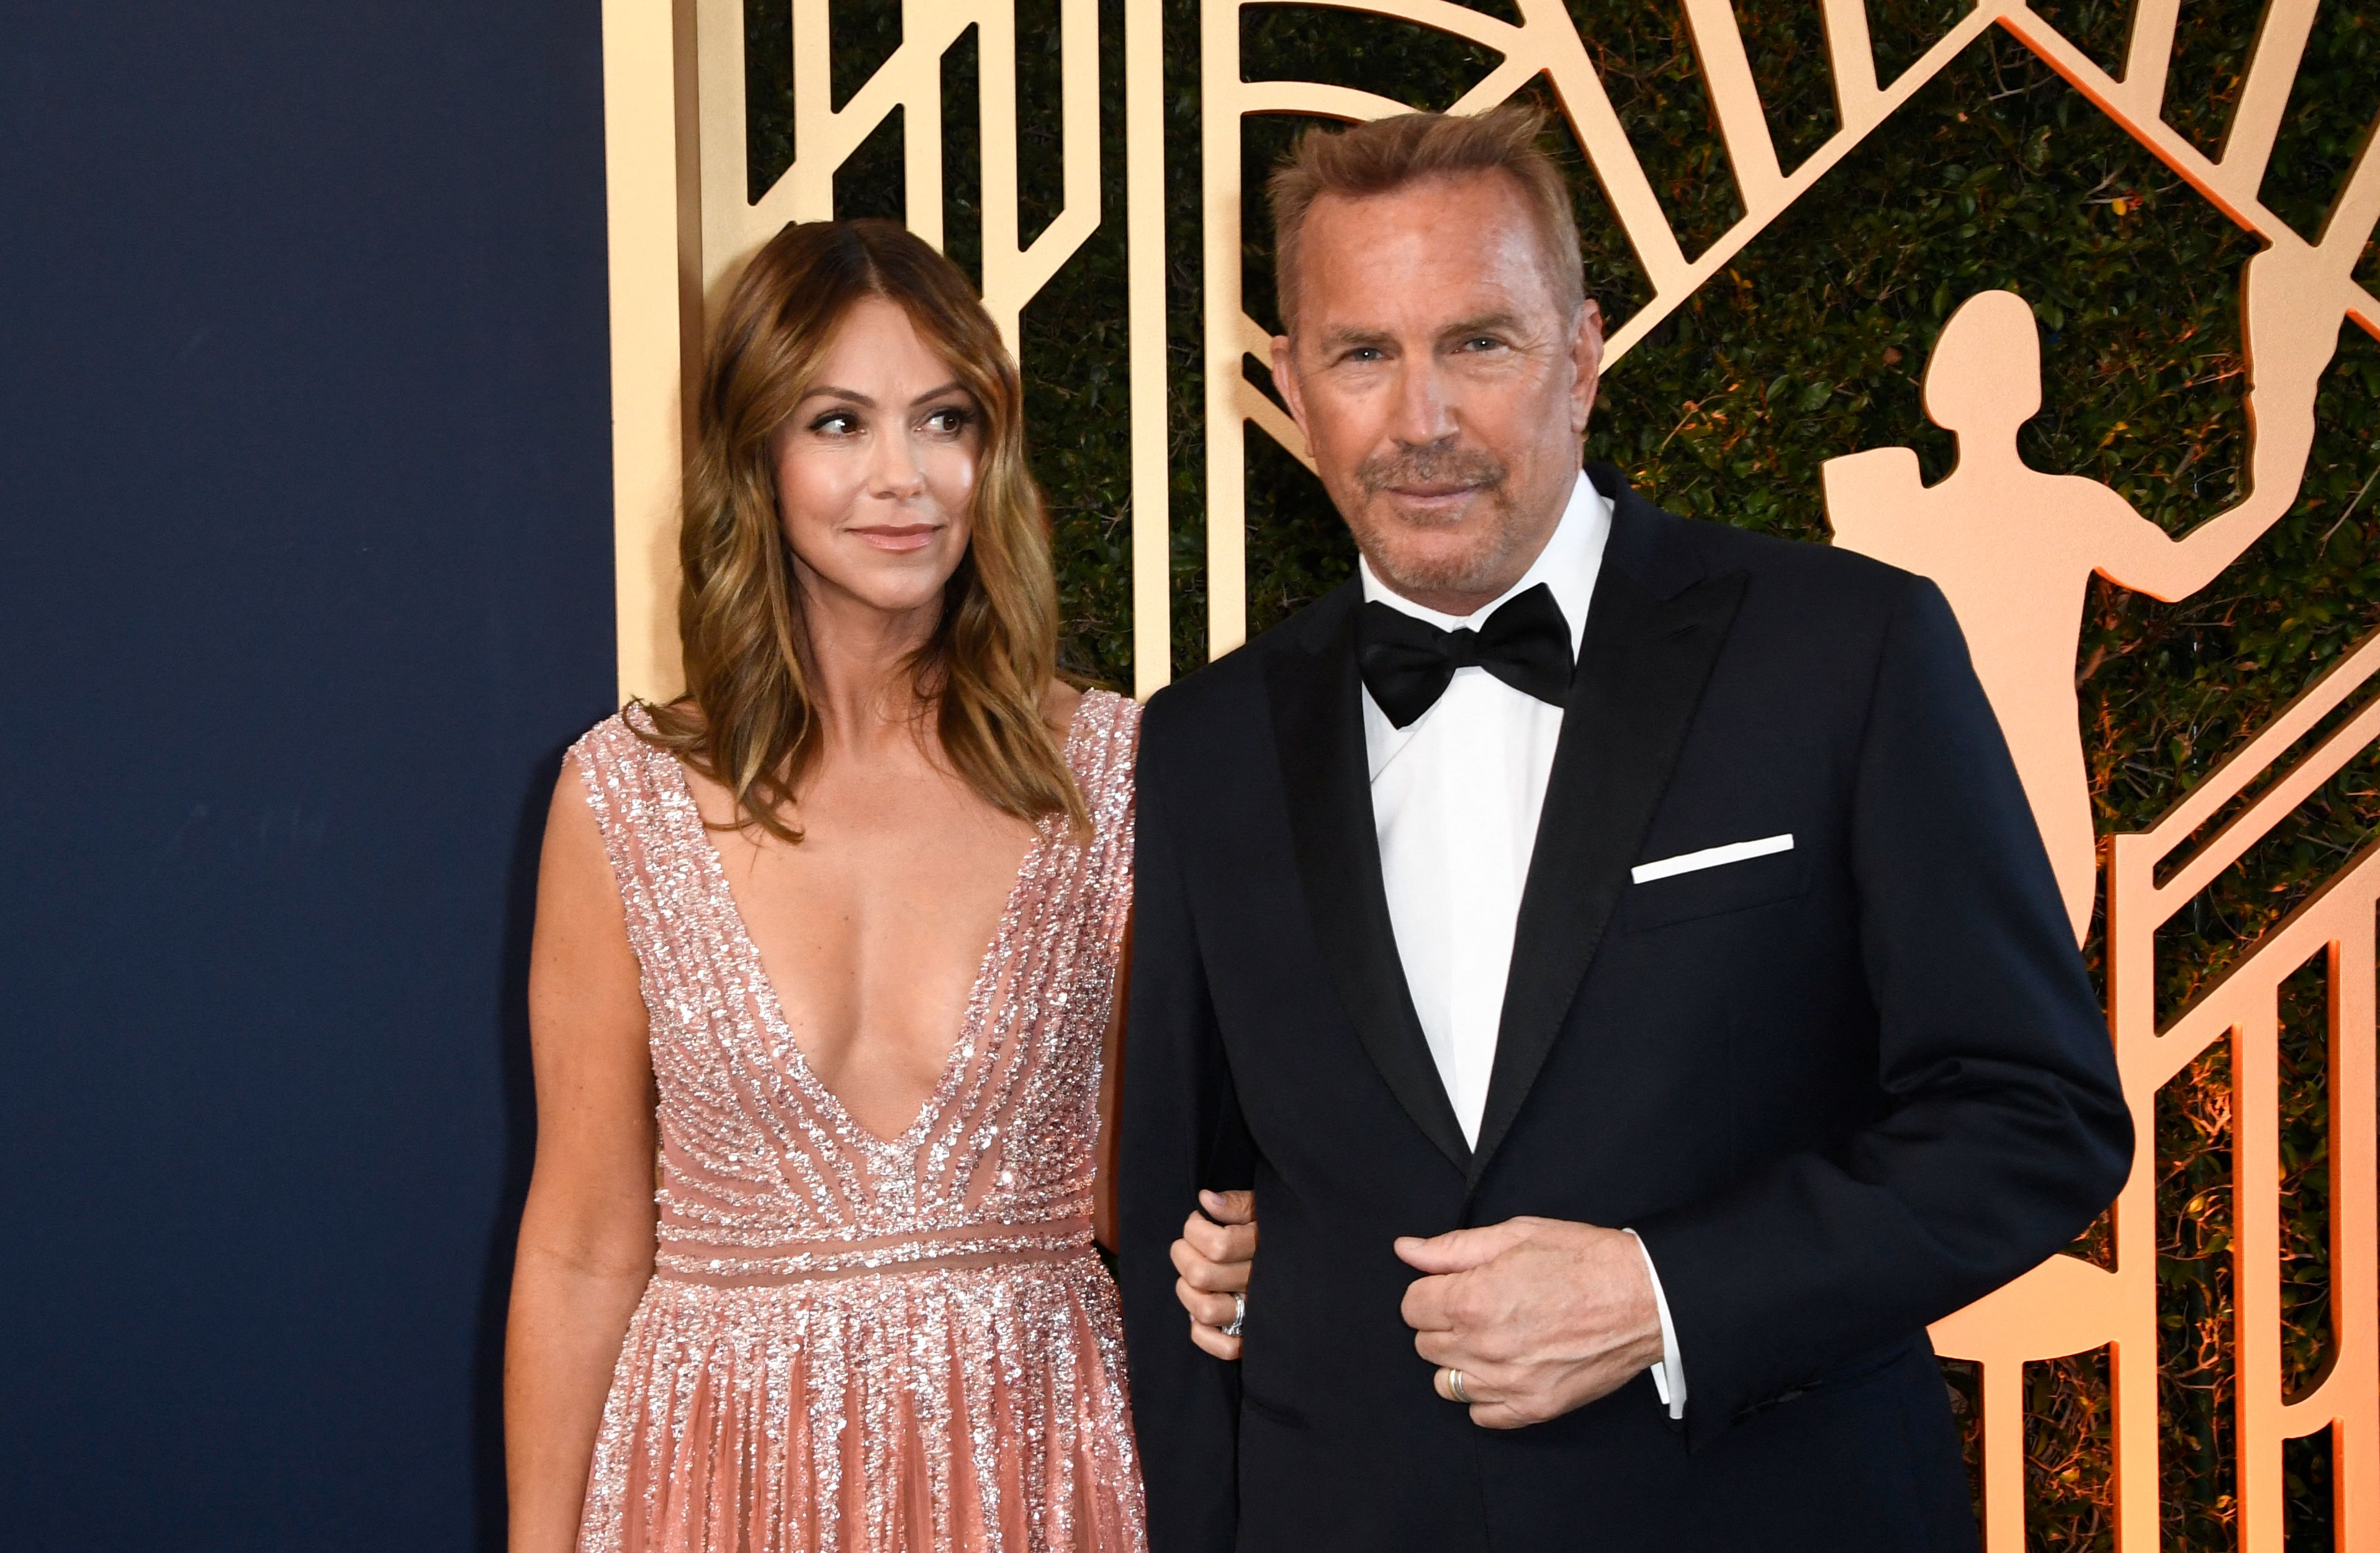 Kevin Costner and his wife, Christine at the 28th Annual Screen Actors Guild (SAG) Awards at the Barker Hangar in Santa Monica, California